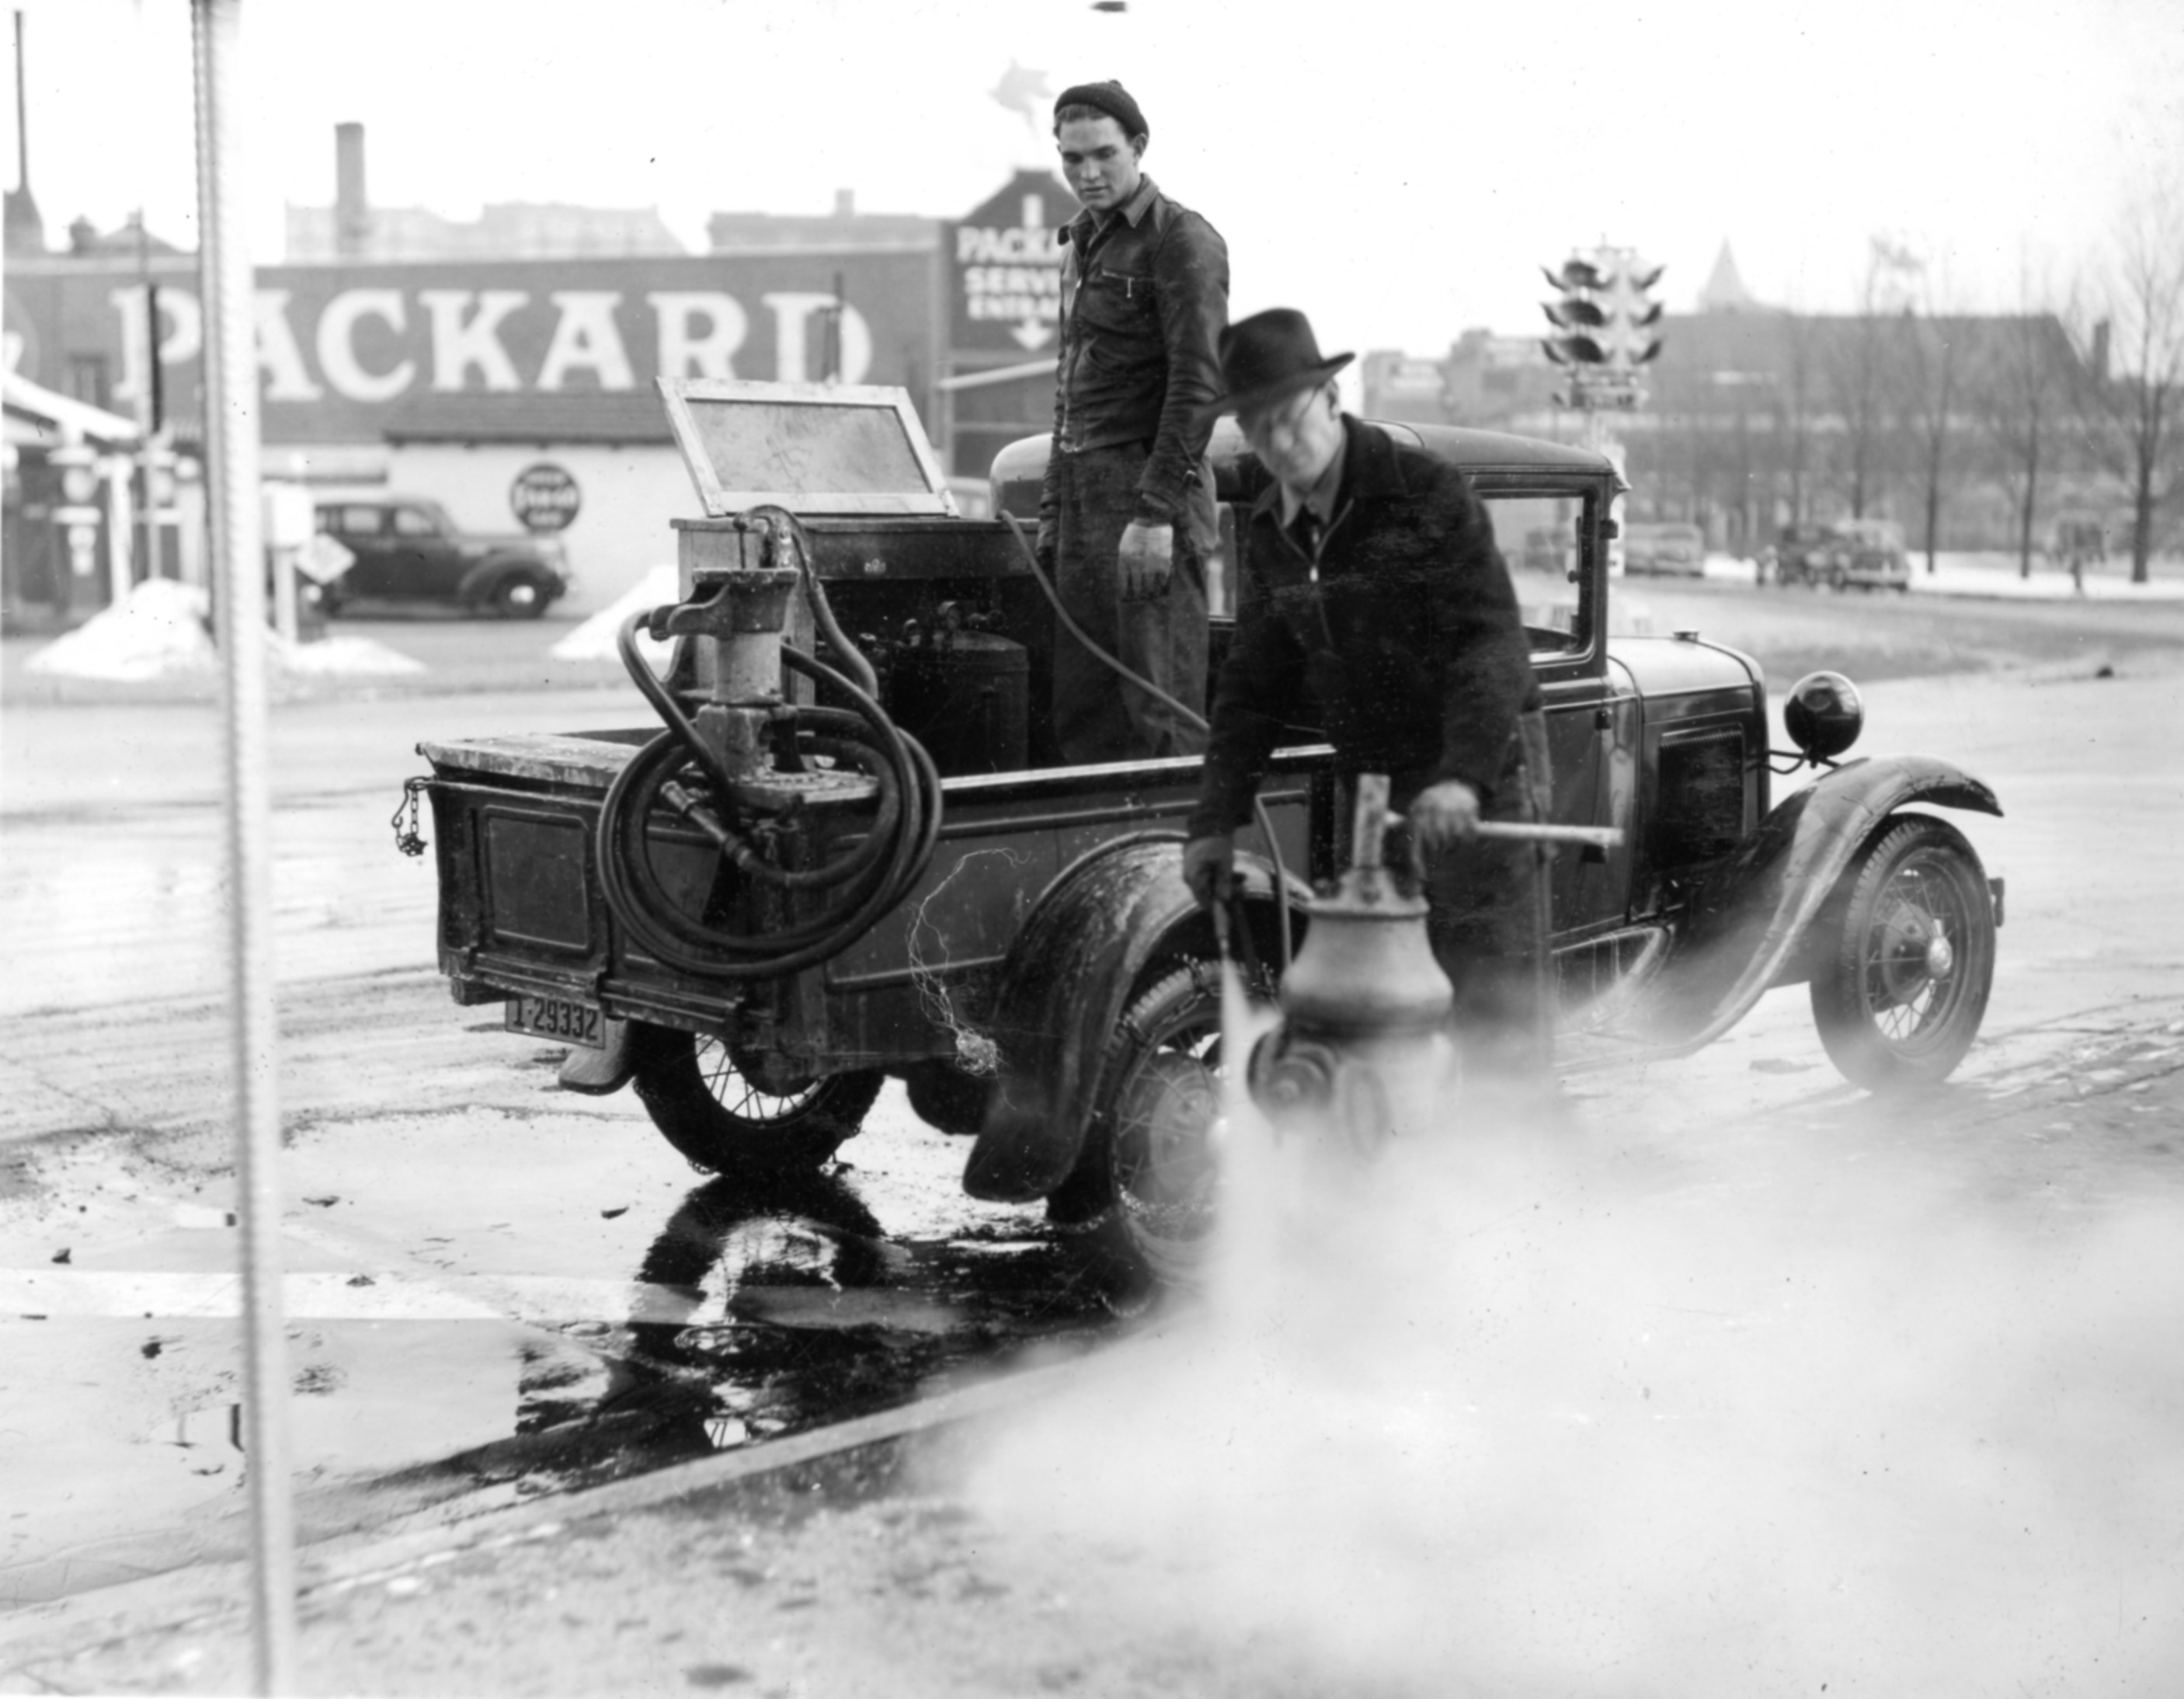 Denver Water employees, Raymond Hebenstreit and Ernest Shears, thaw a fire hydrant with steam in 1940.